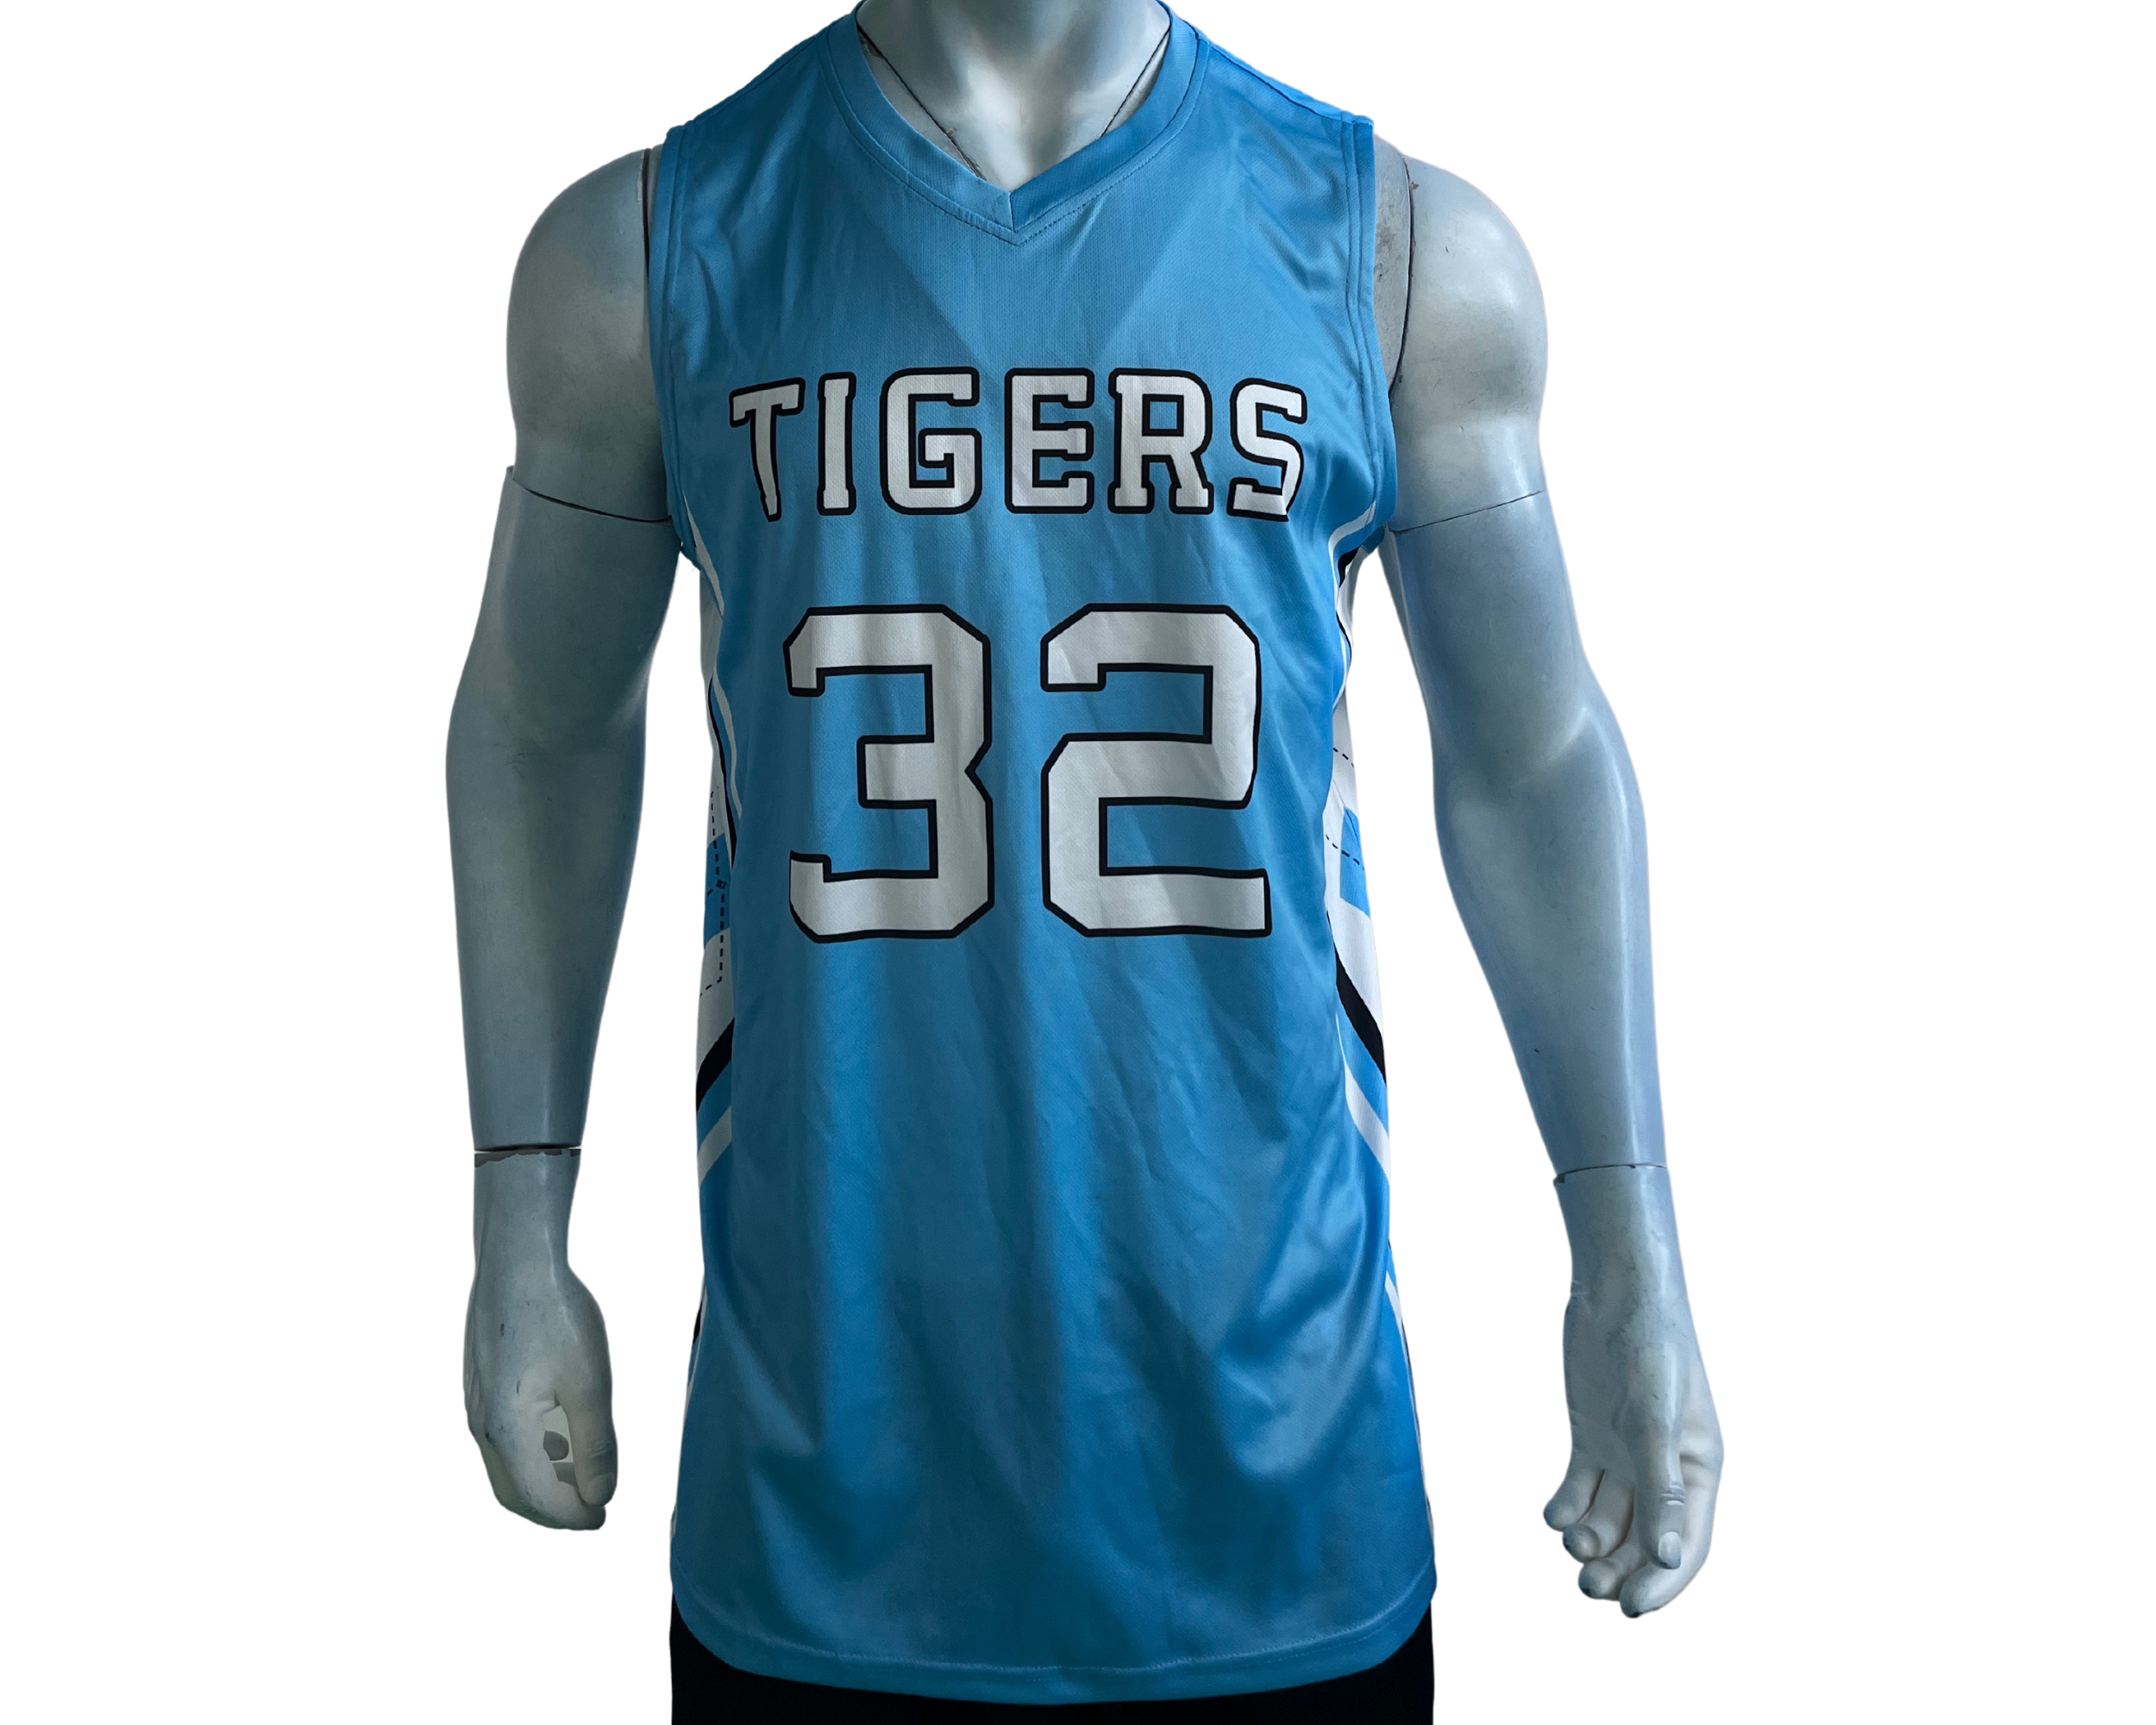 Sublimated Basketball Jersey – Spartan Apparel & Merch